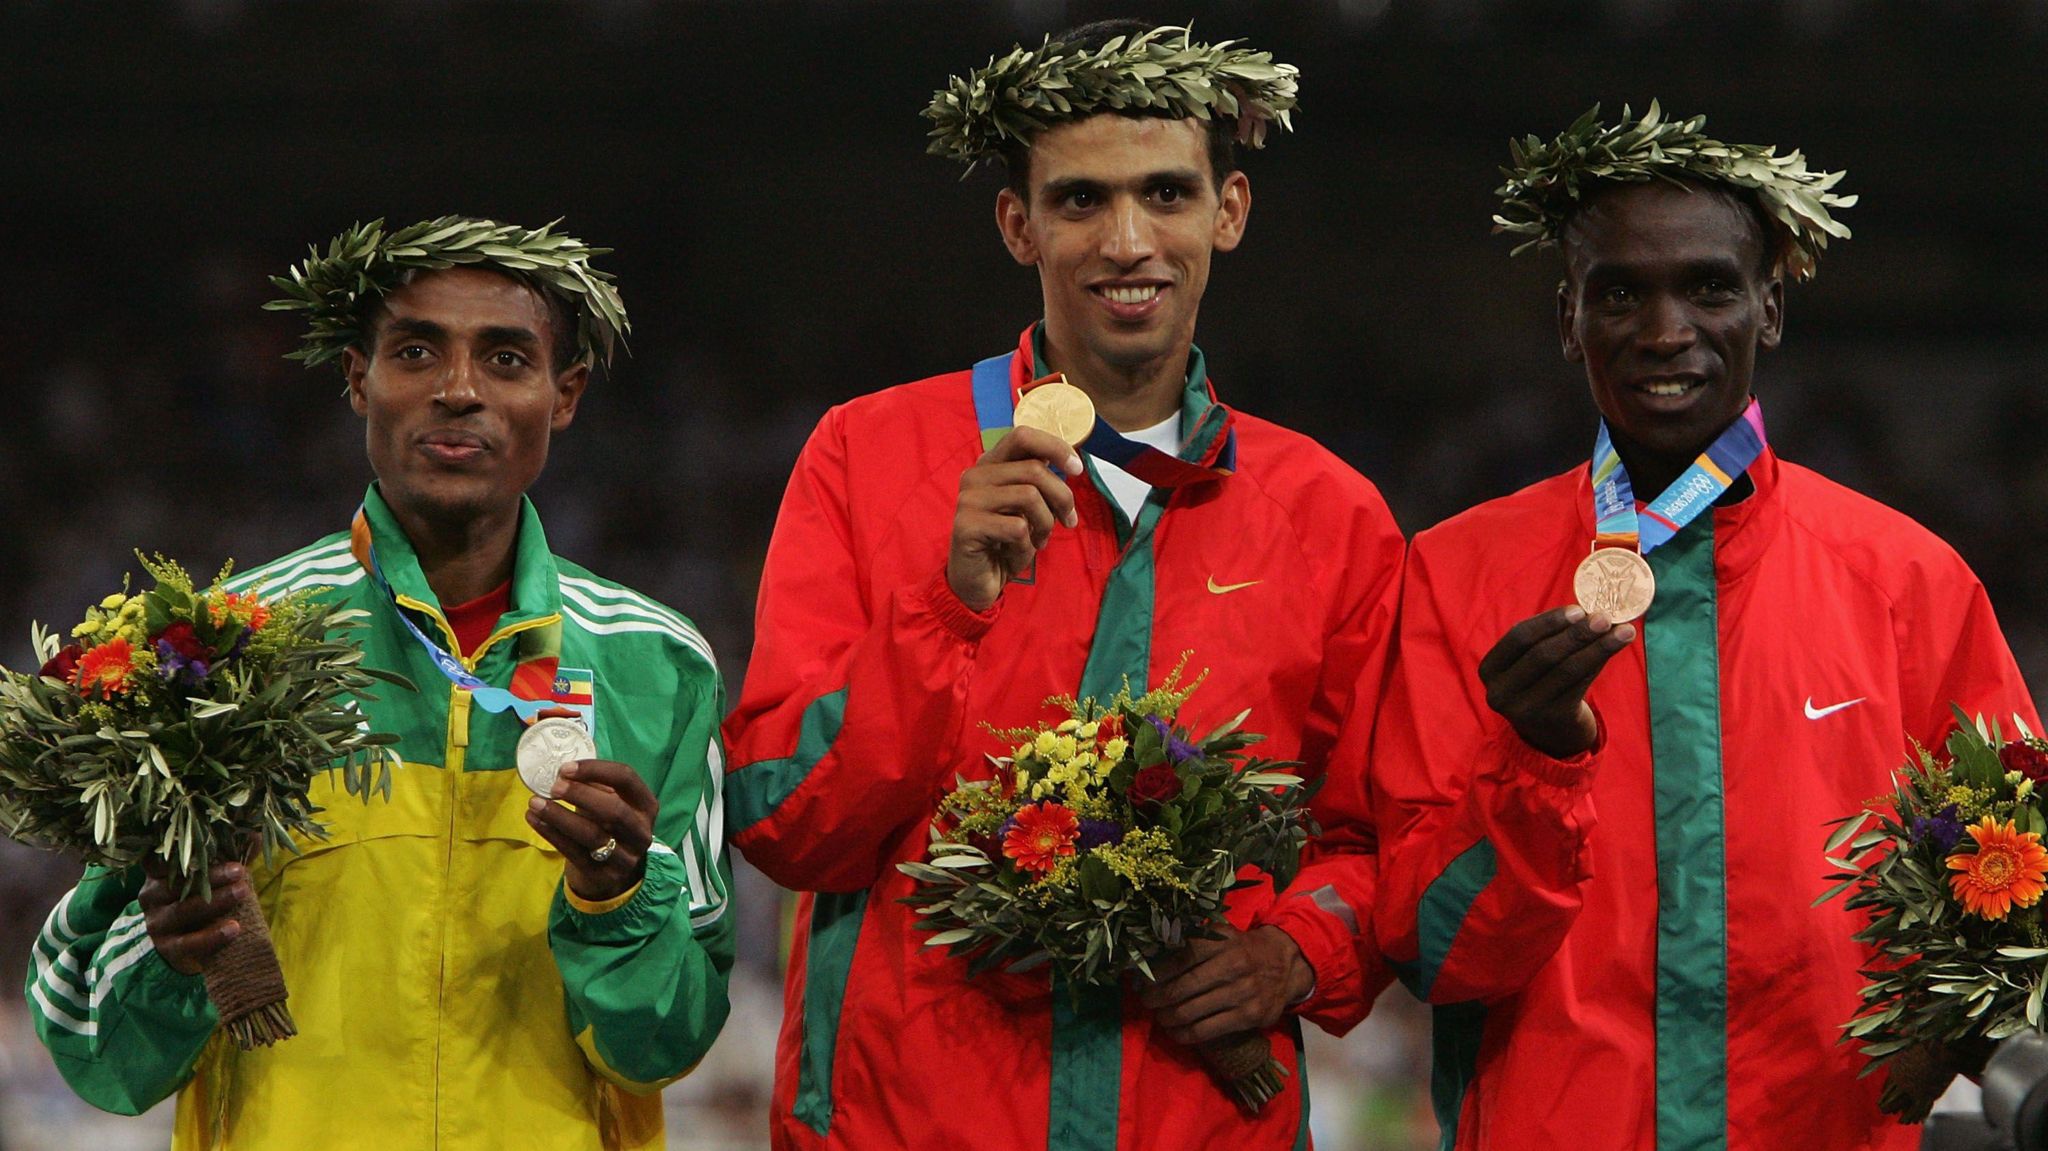 Gold medalist Hicham El Guerrouj of Morocco (centre), silver medallist Kenenisa Bekele of Ethiopia (left) and bronze medallist Eliud Kipchoge of Kenya (right) celebrate on the podium during the medal ceremony of the men's 5,000 metres at Athens 2004 